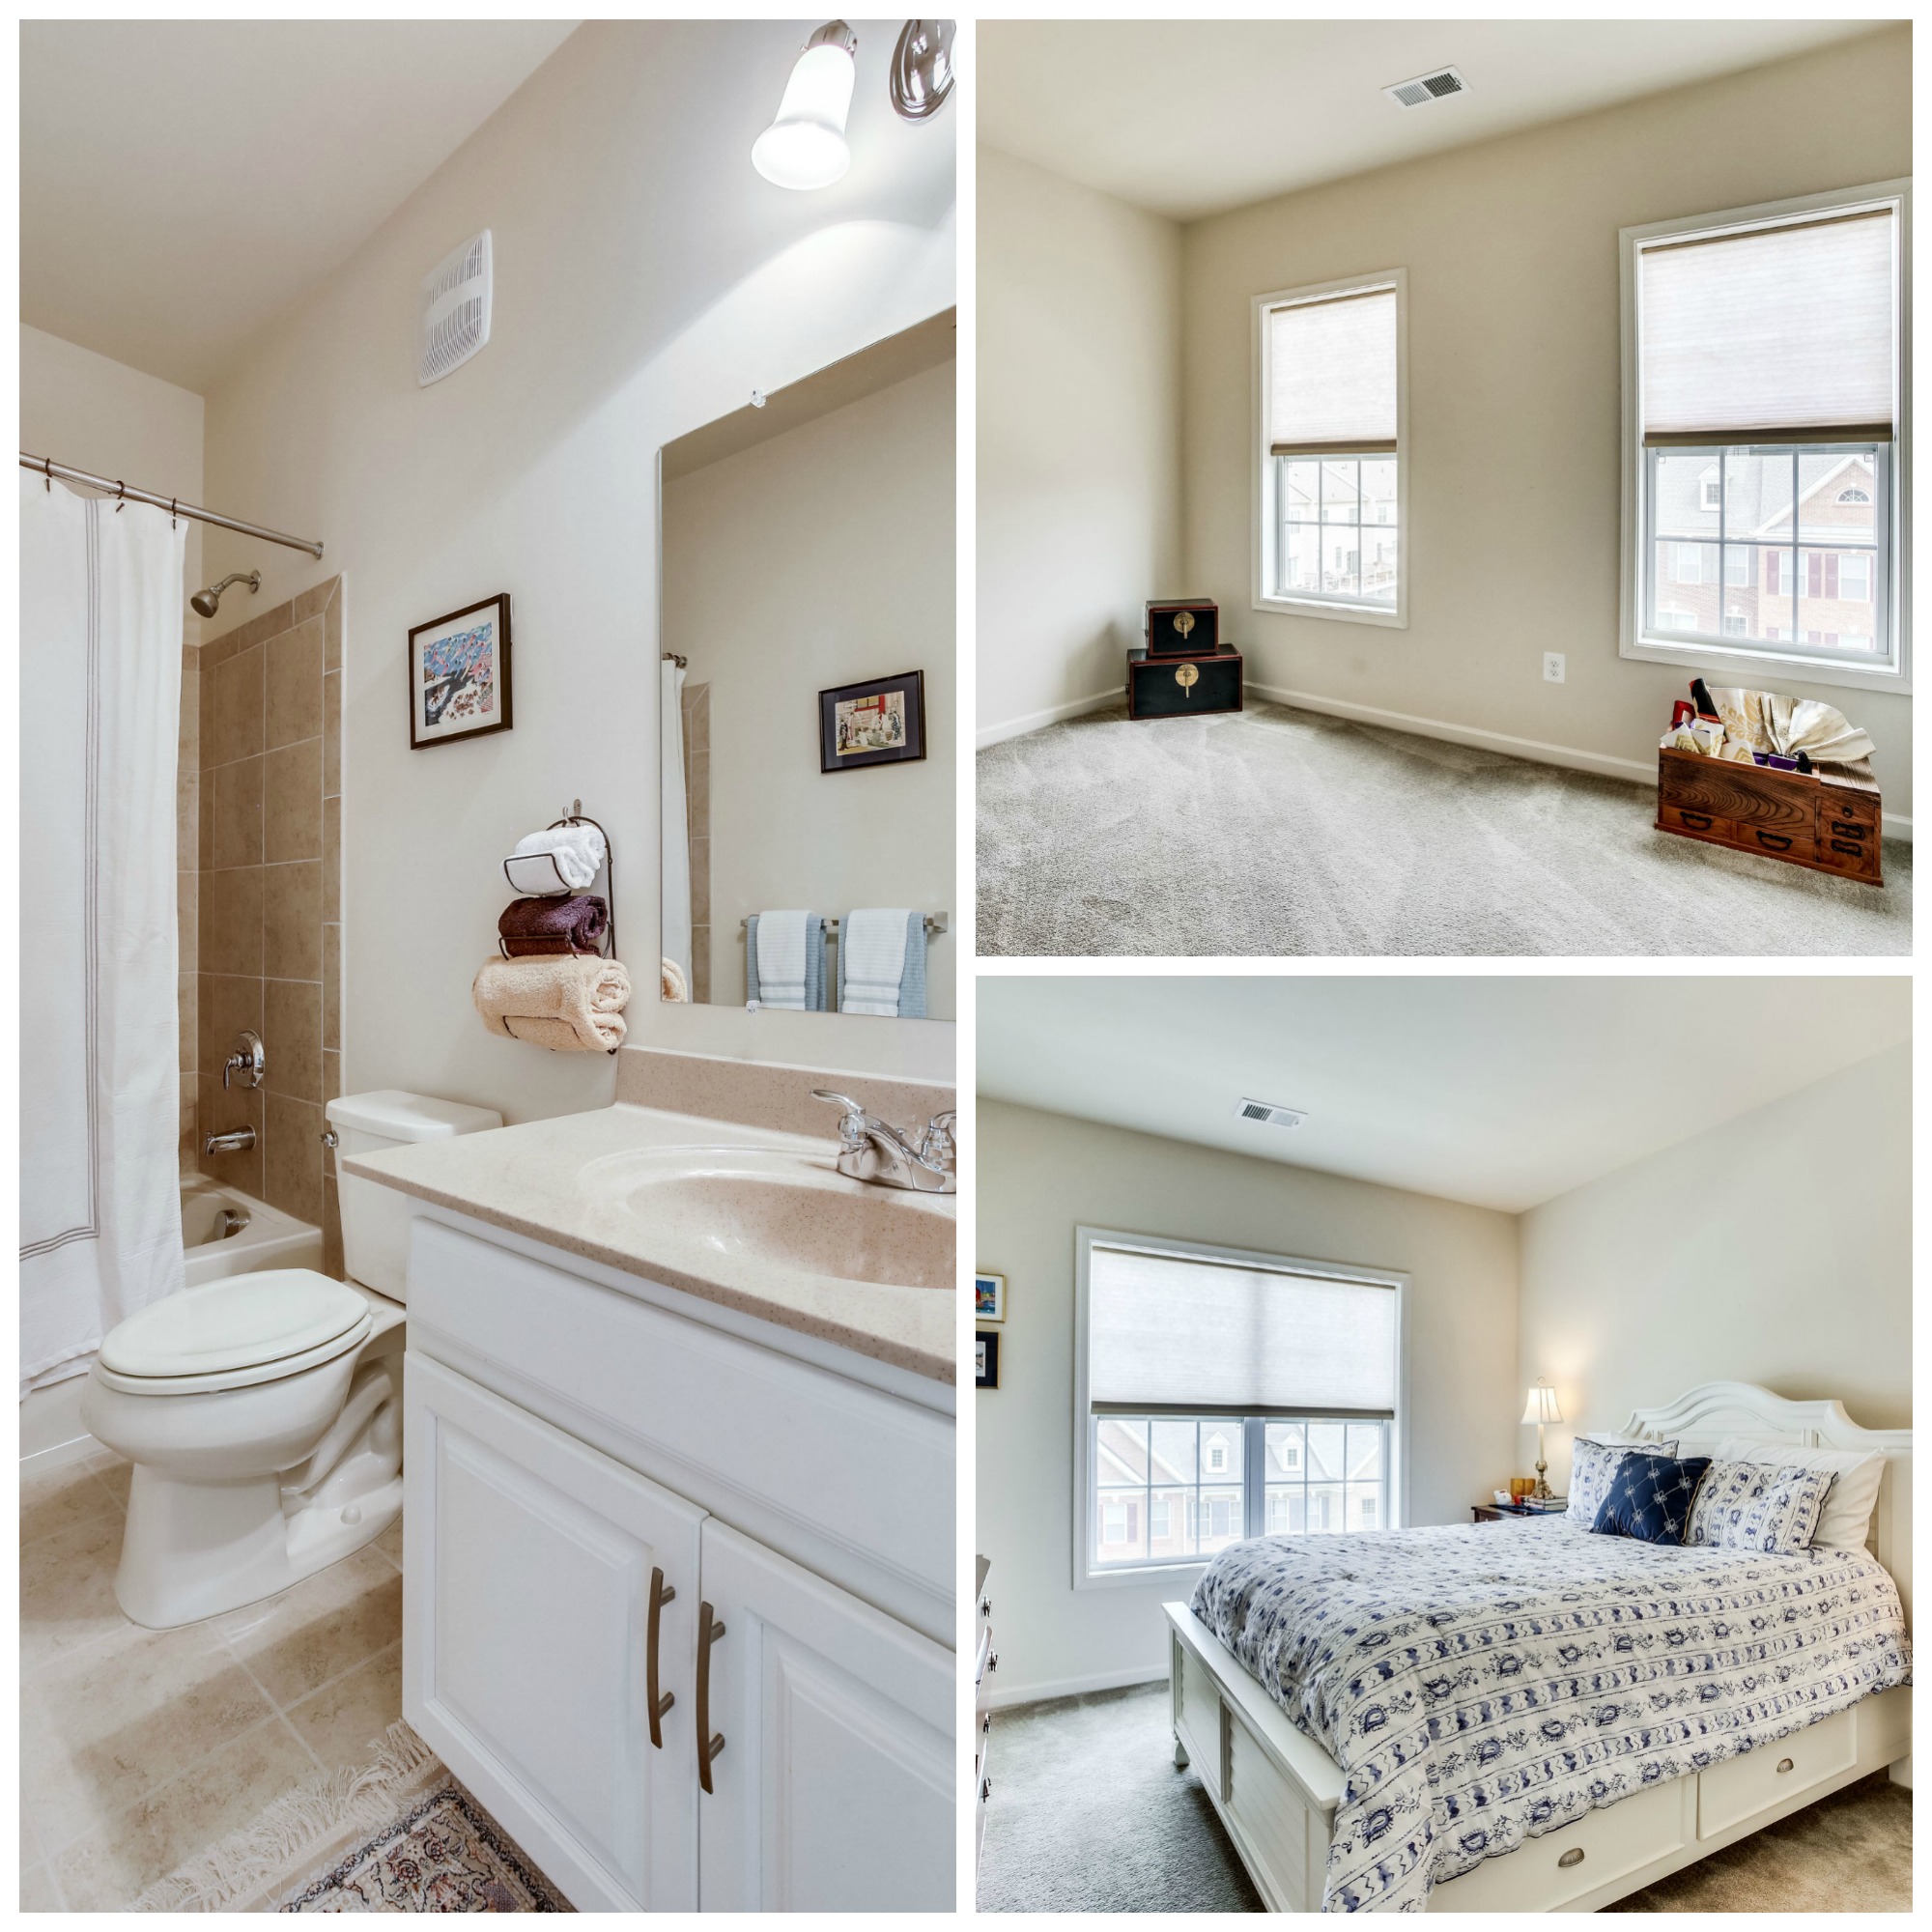 43209 Thoroughfare Gap Ter, Ashburn- Additional Bedrooms and Bathroom 